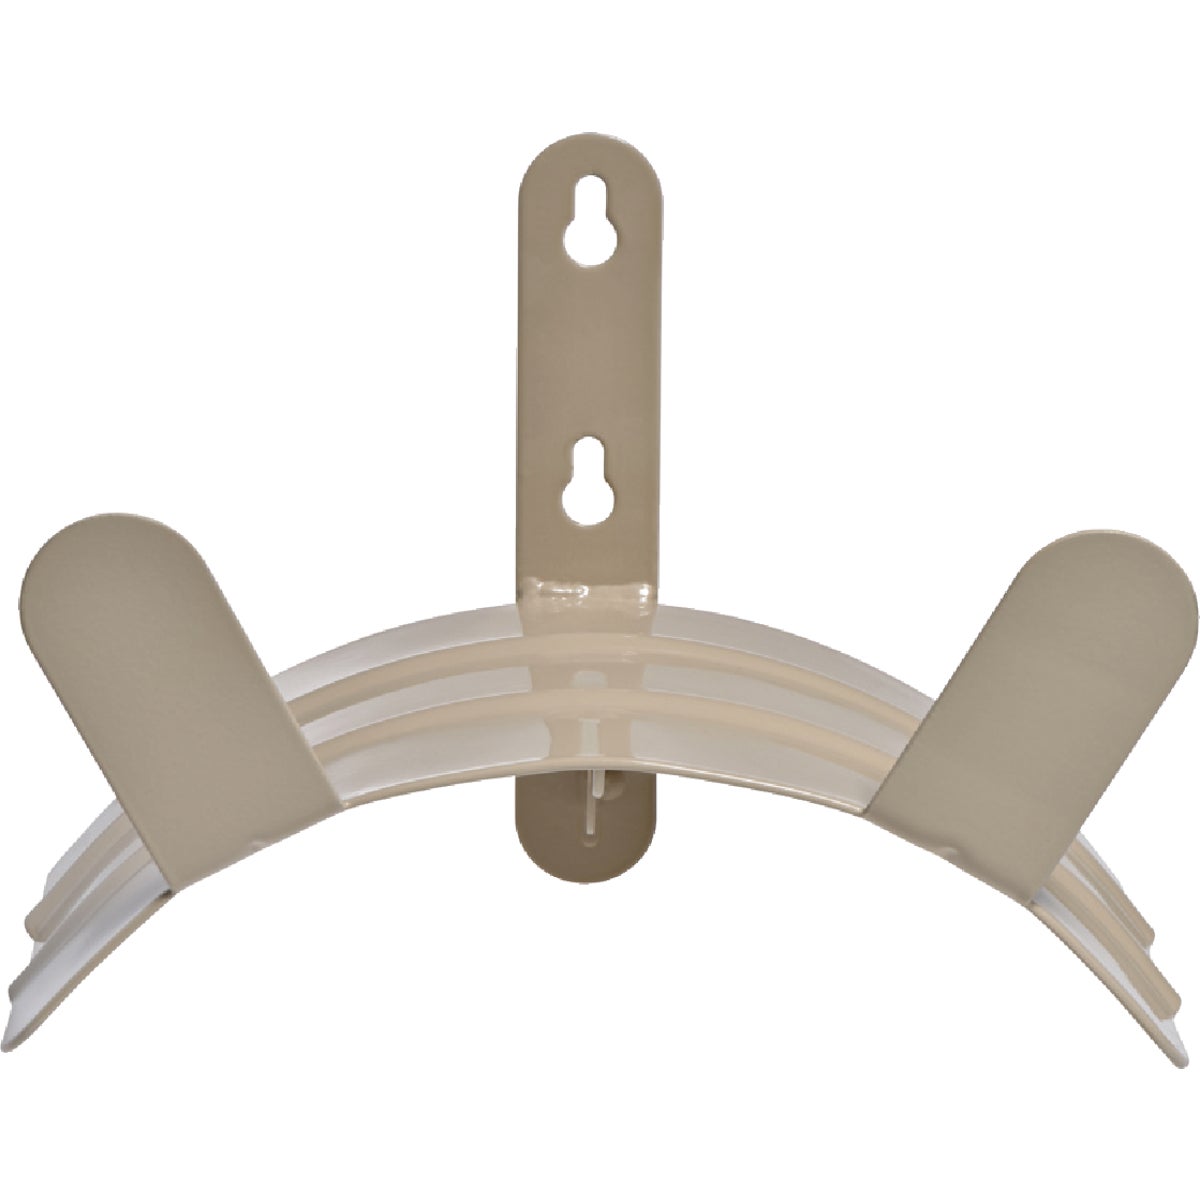 Item 700962, Basic wall mounted hose hanger. Holds up to 125 Ft. of 5/8 In. hose.